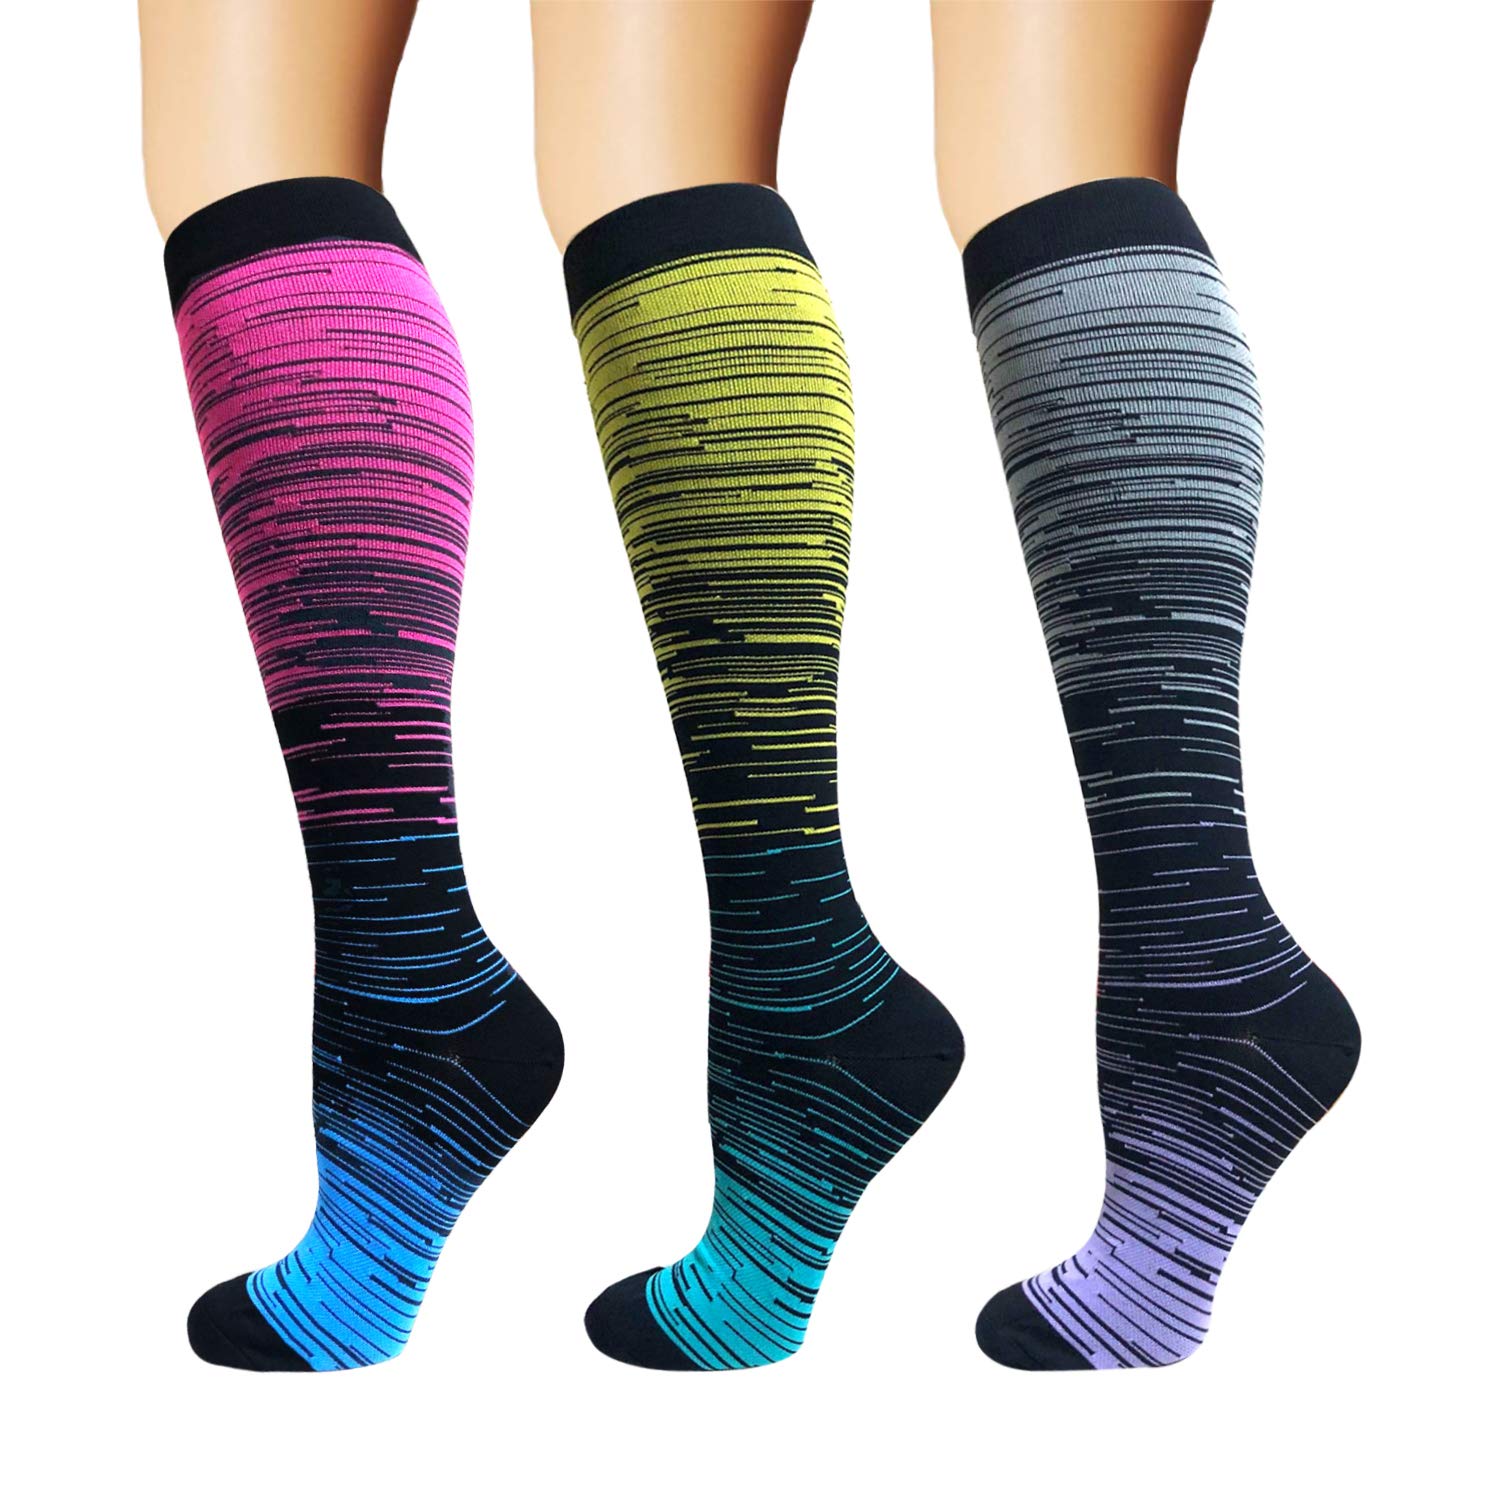 Colorful Knee-High Compression Cycling Socks